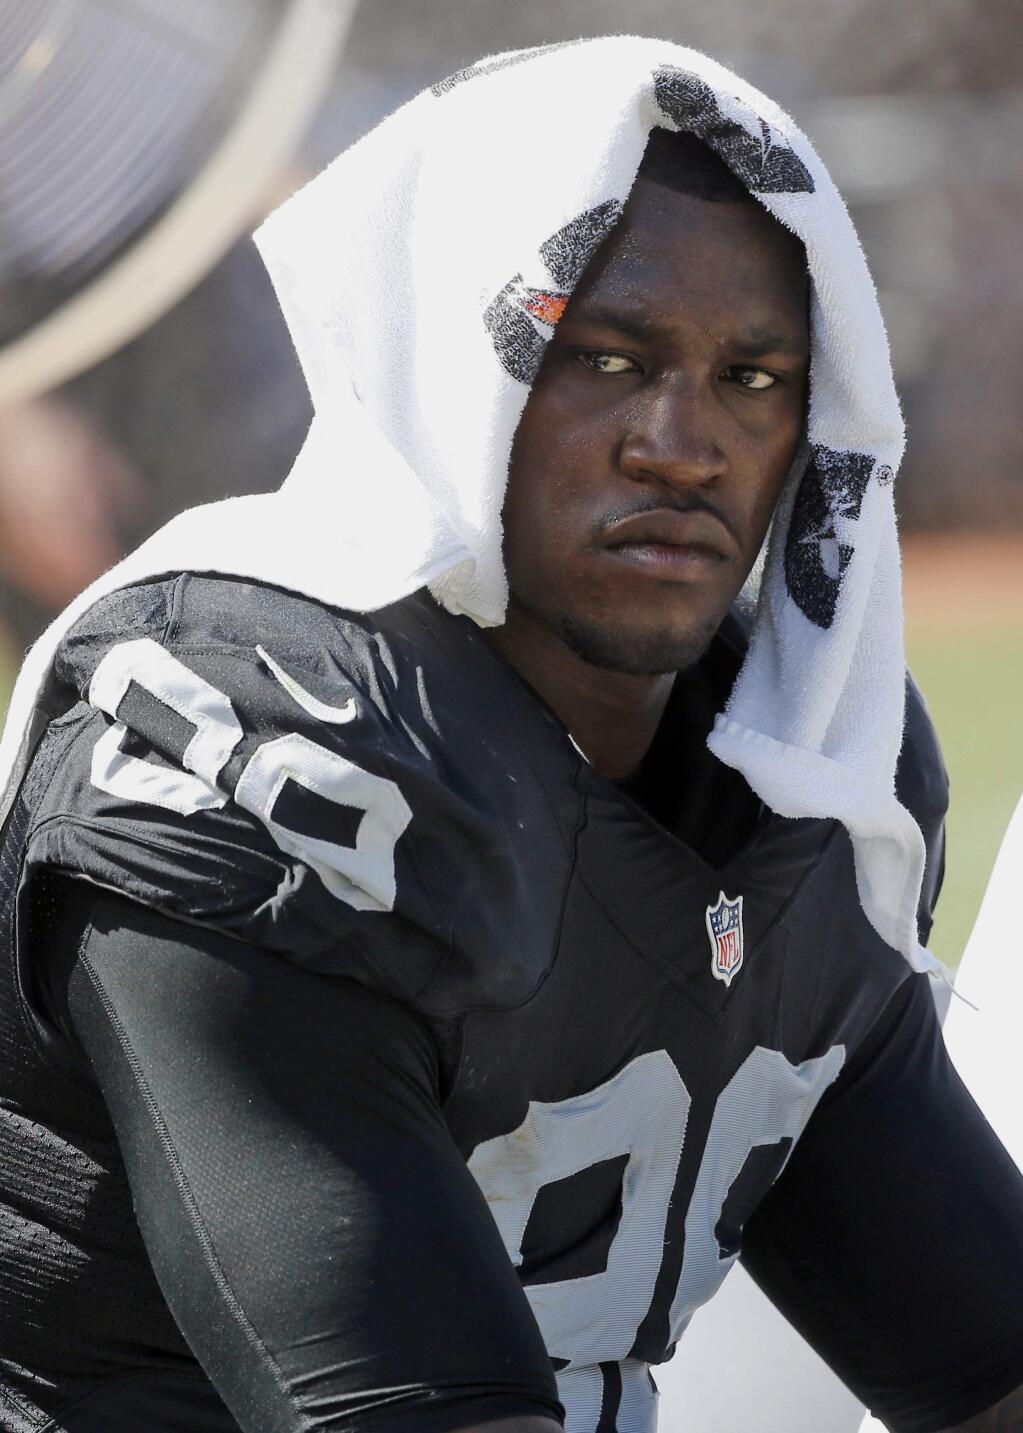 In this Sept. 20, 2015, file photo, the Oakland Raiders' Aldon Smith cools off during a game against the Baltimore Ravens in Oakland. (AP Photo/Tony Avelar, File)